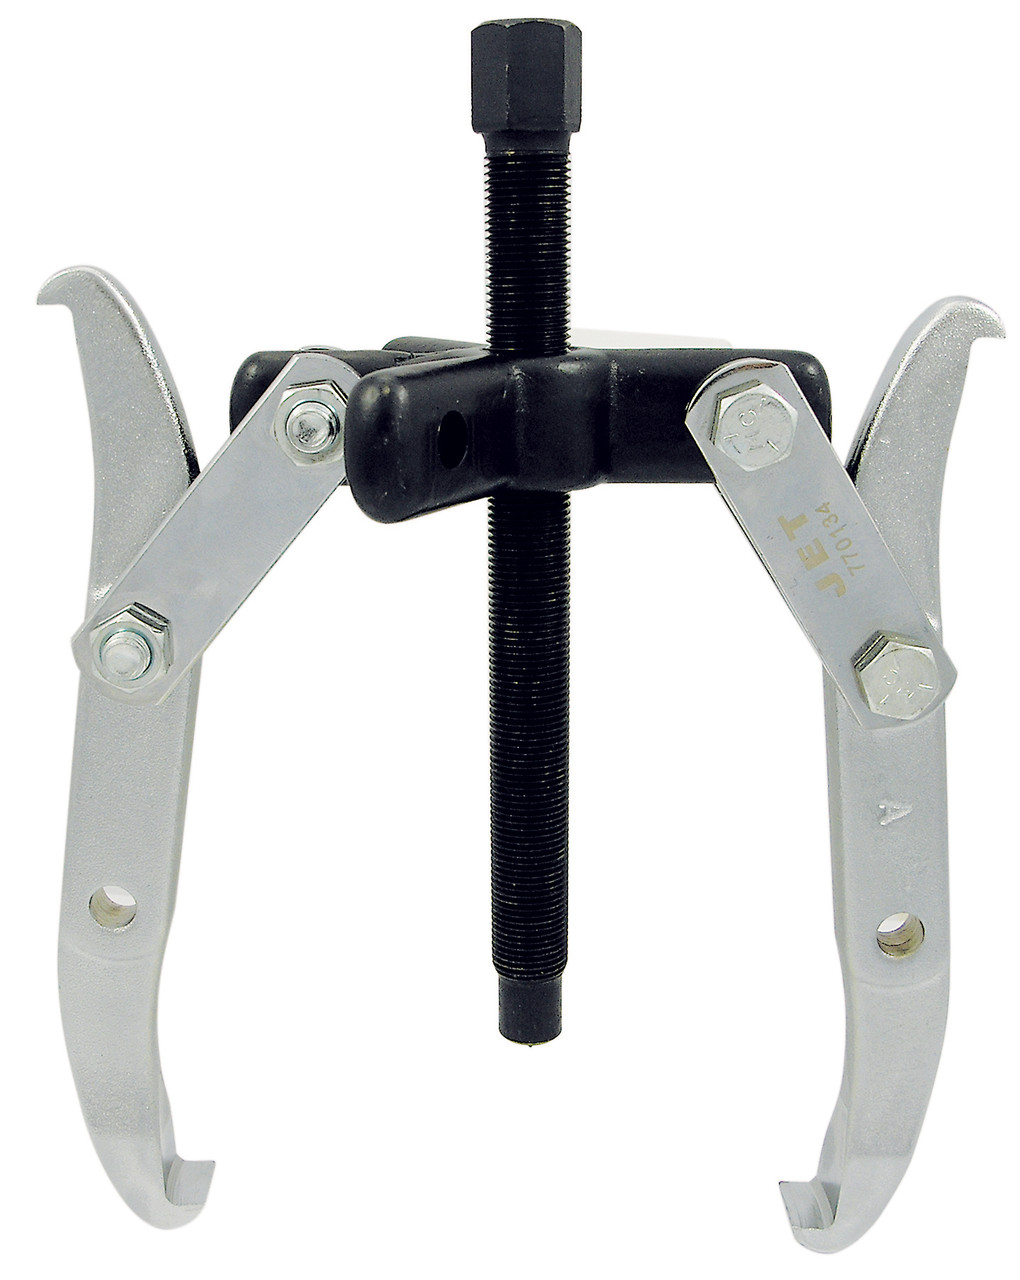 6" 2/3 Jaw Professional Gear Puller 770134